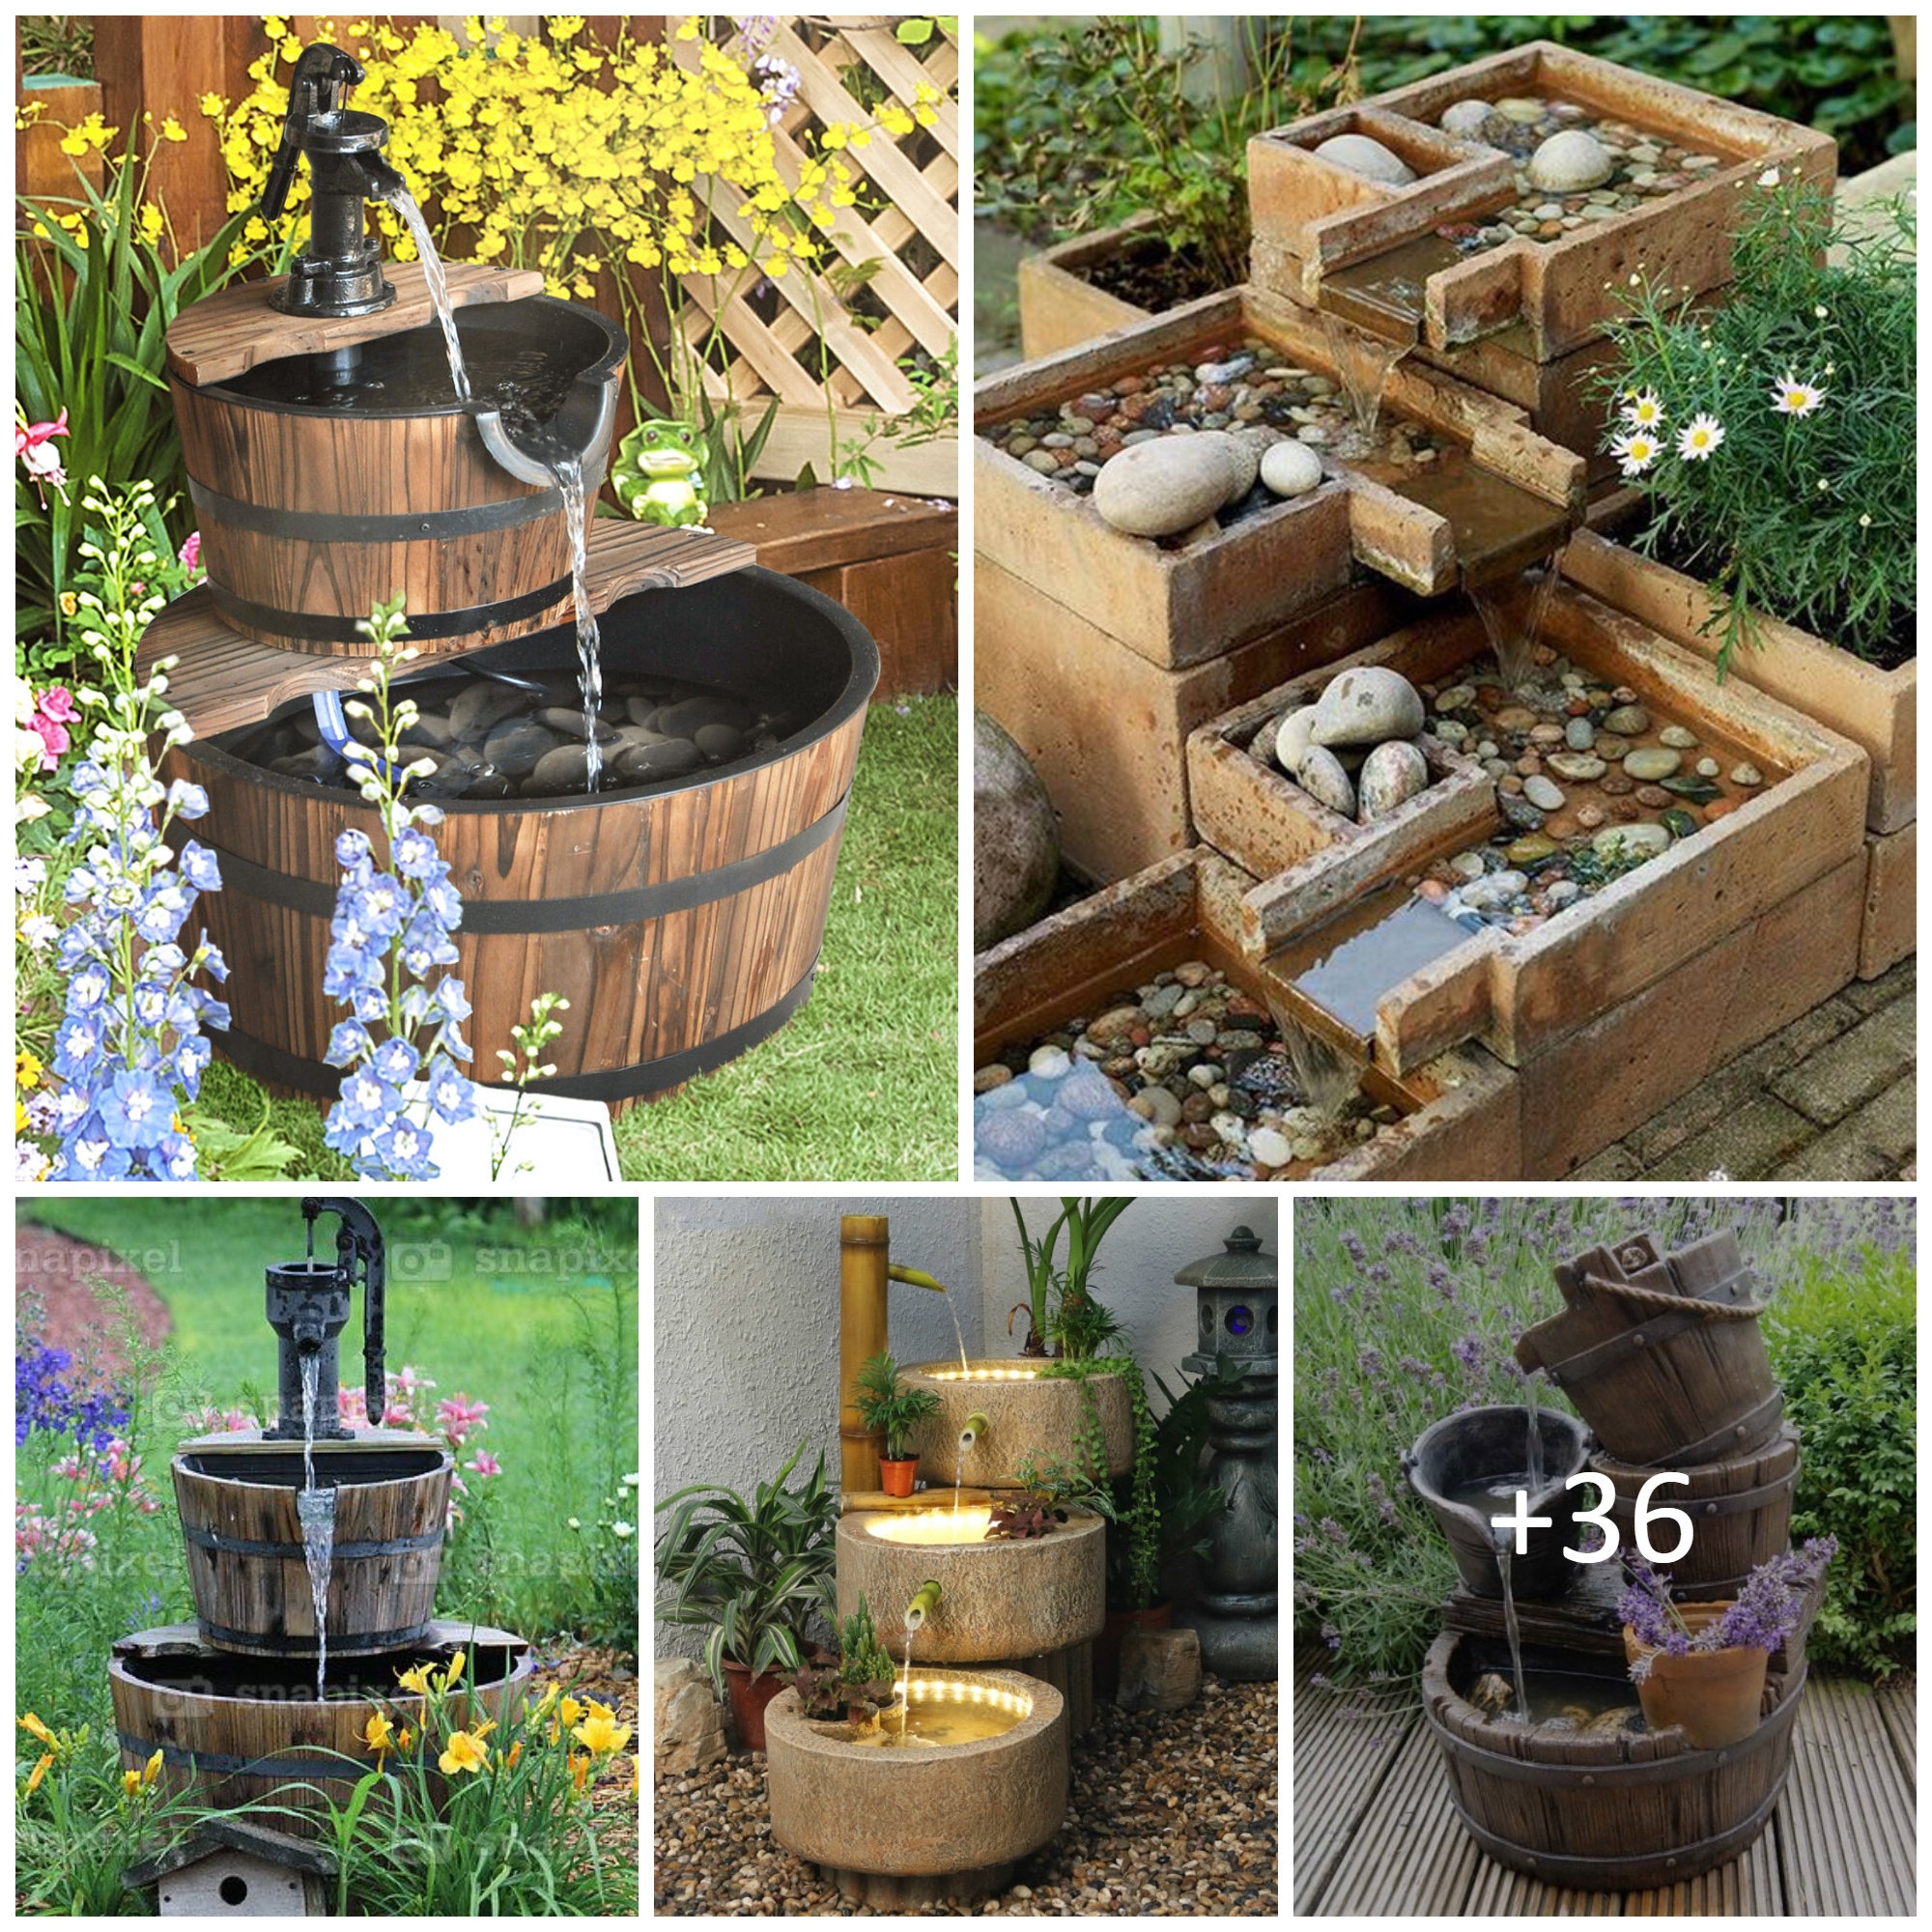 Water feature ideas – ways to add water to any backyard